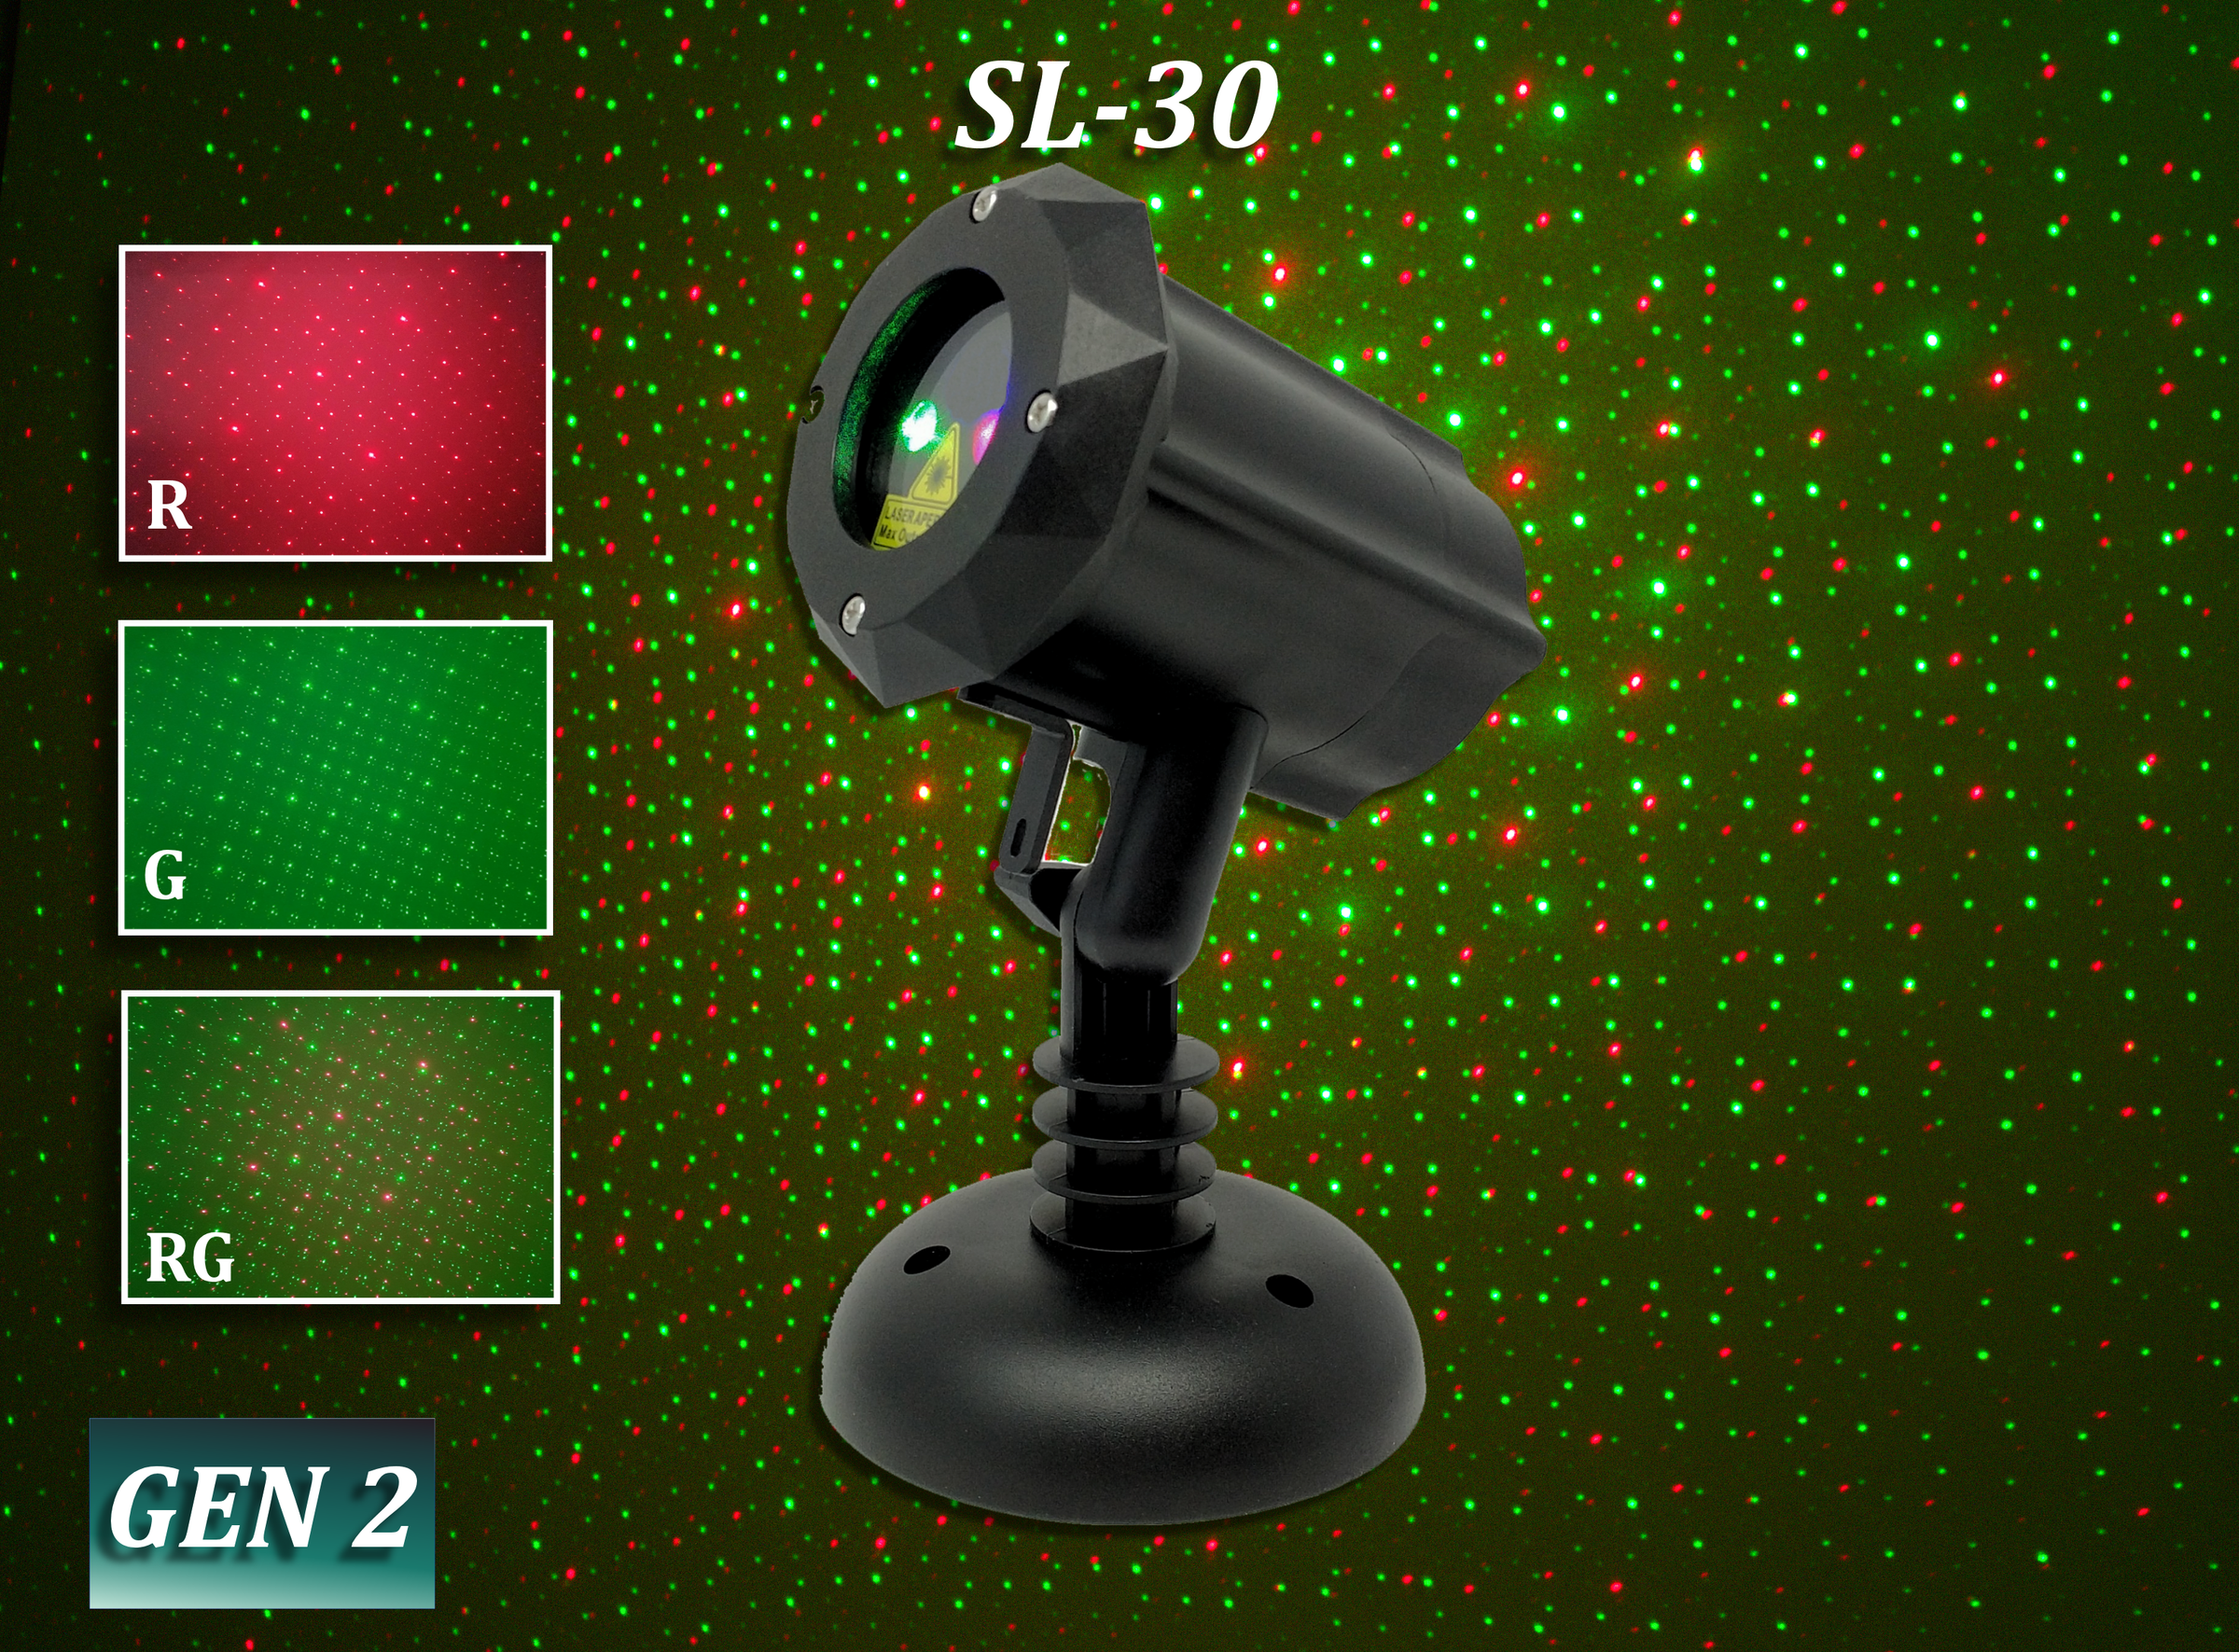 INFINITY Motion Red & Green Laser Light Projector with Remote